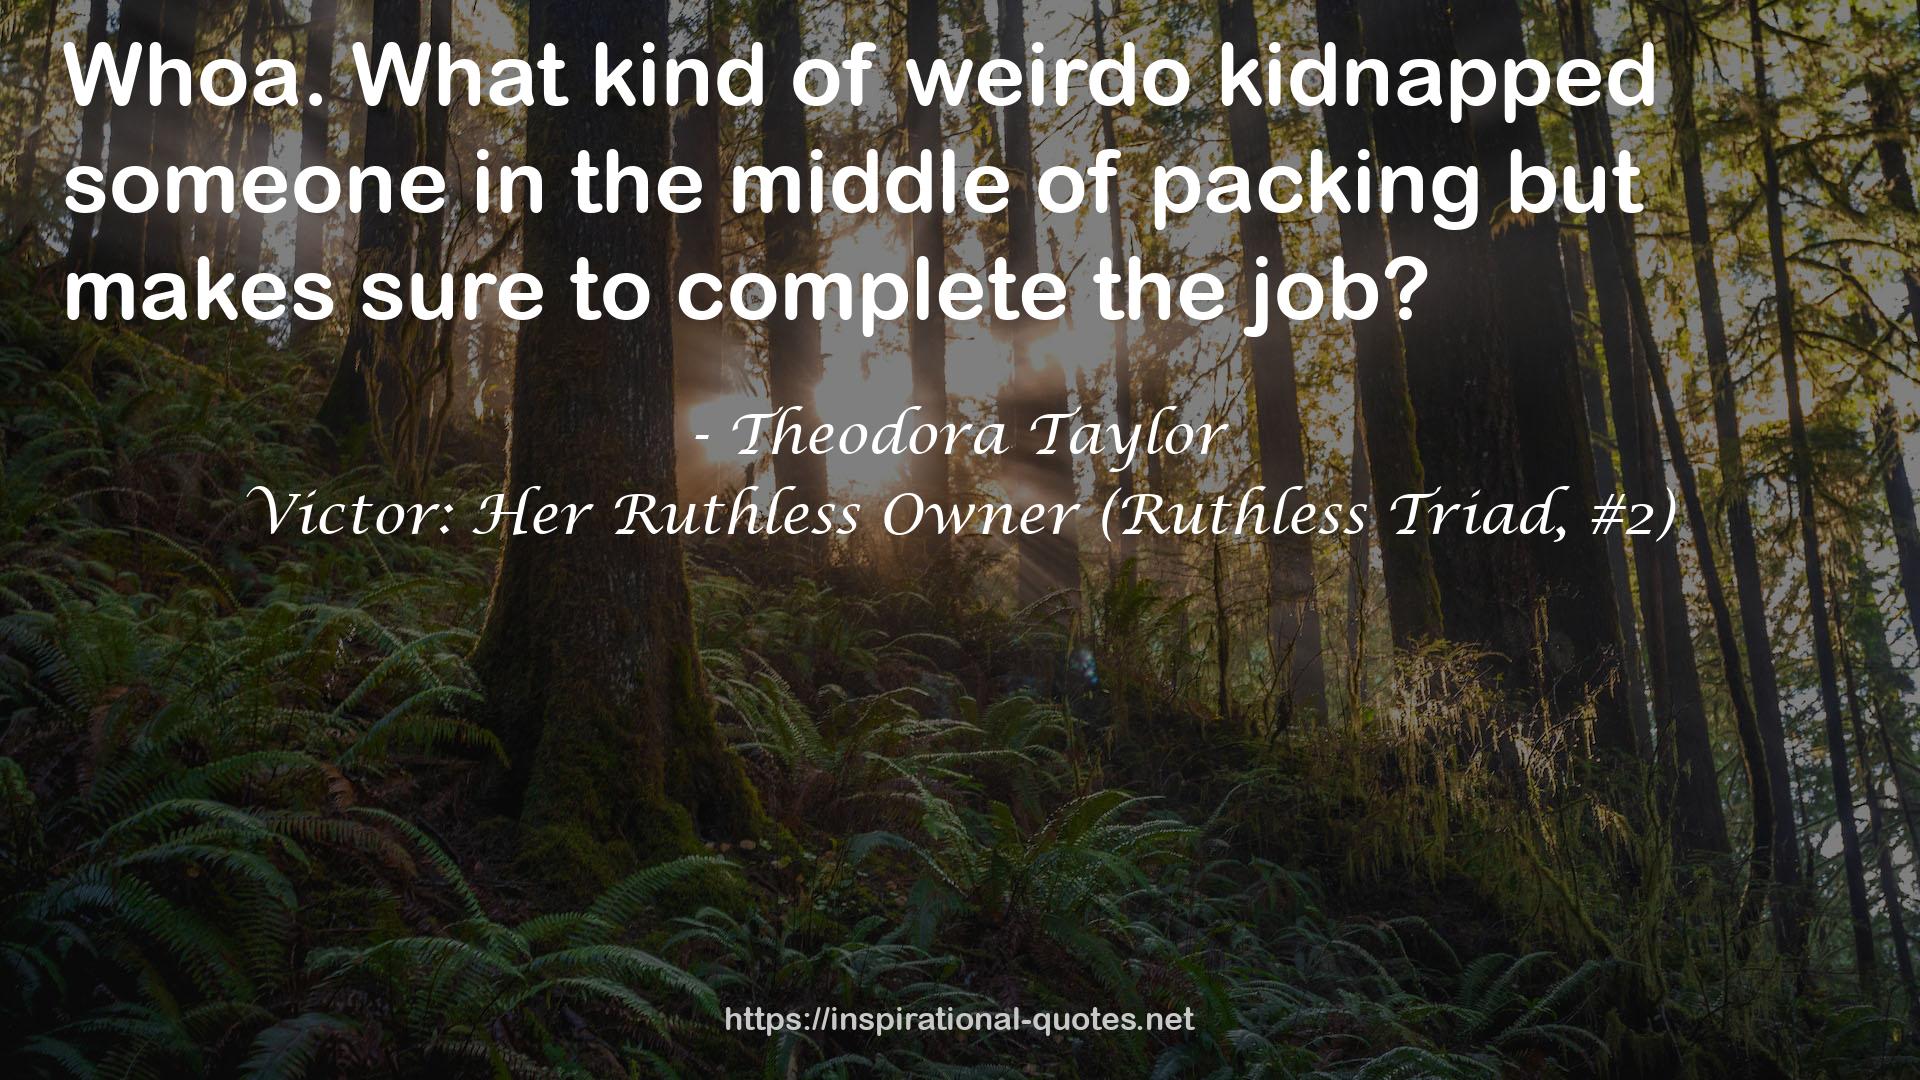 Victor: Her Ruthless Owner (Ruthless Triad, #2) QUOTES